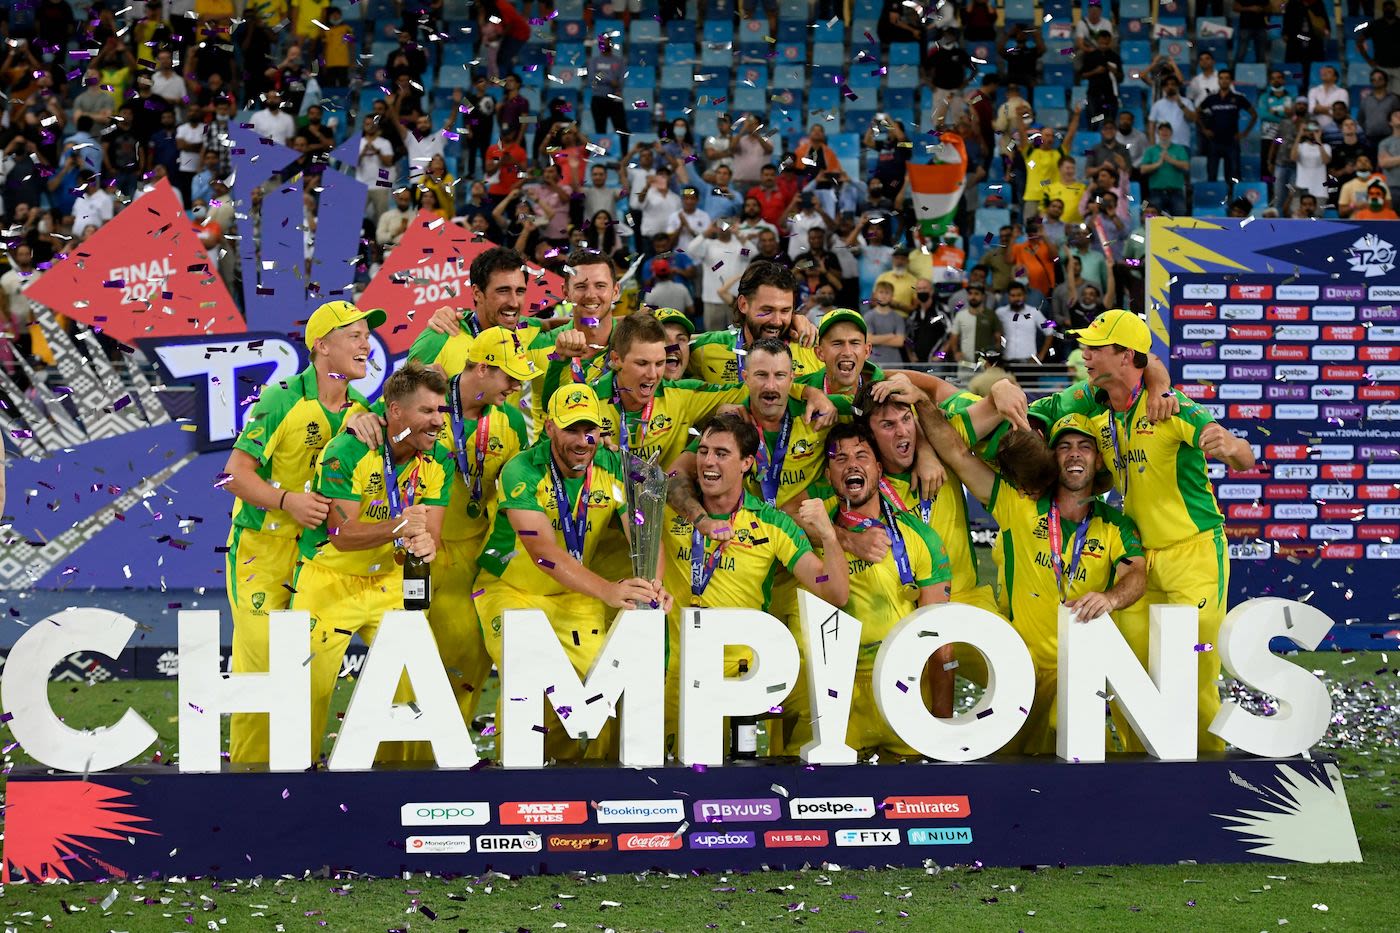 ICC Men's T20 World Cup - Cricket photos and images